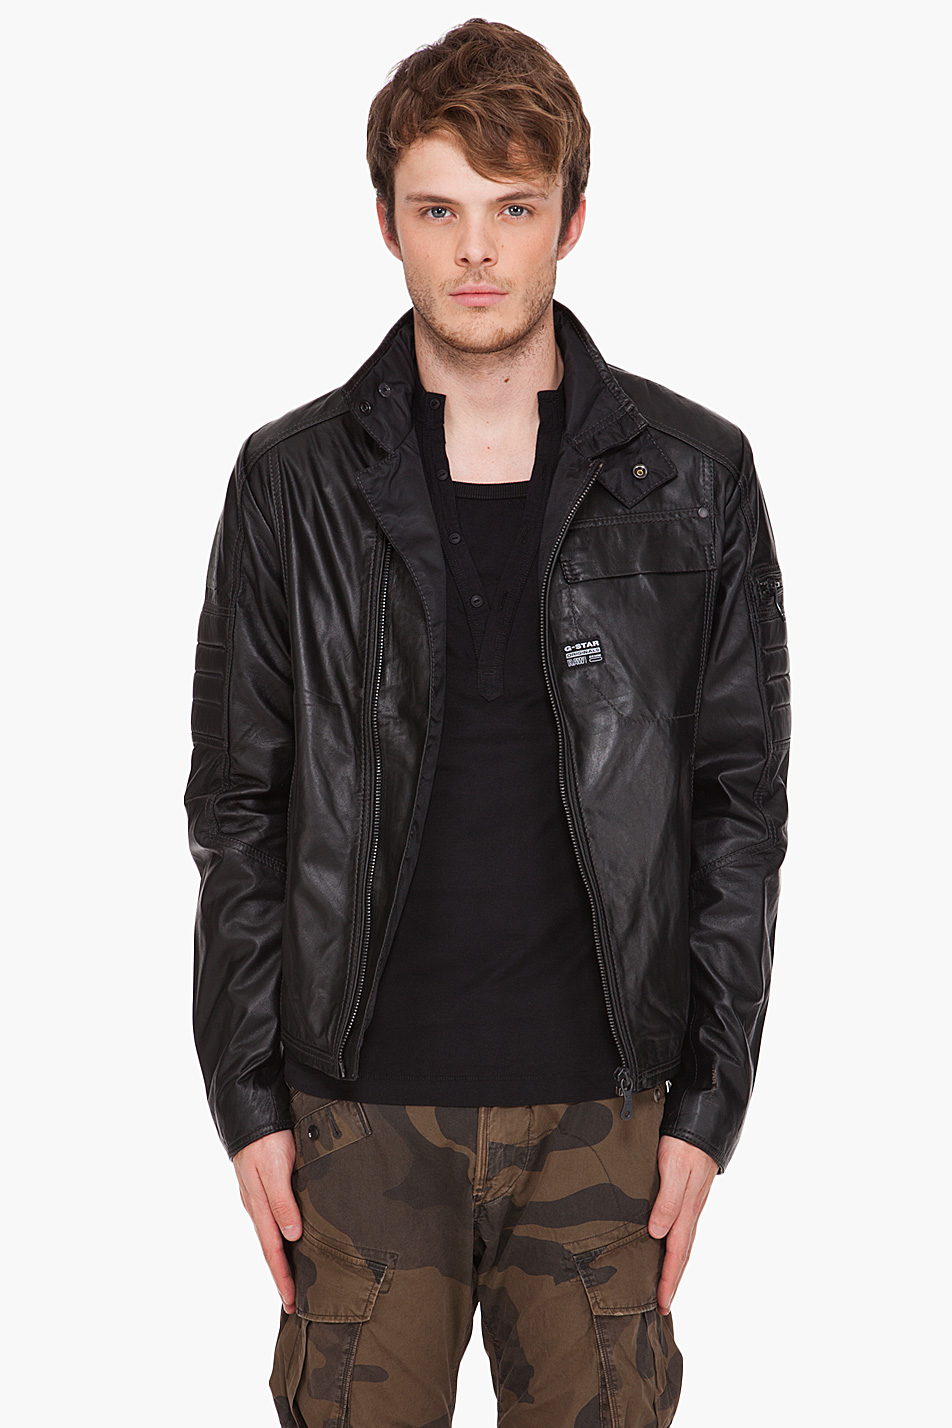 G-Star RAW Jet Mfd Leather Jacket in Black for Men - Lyst